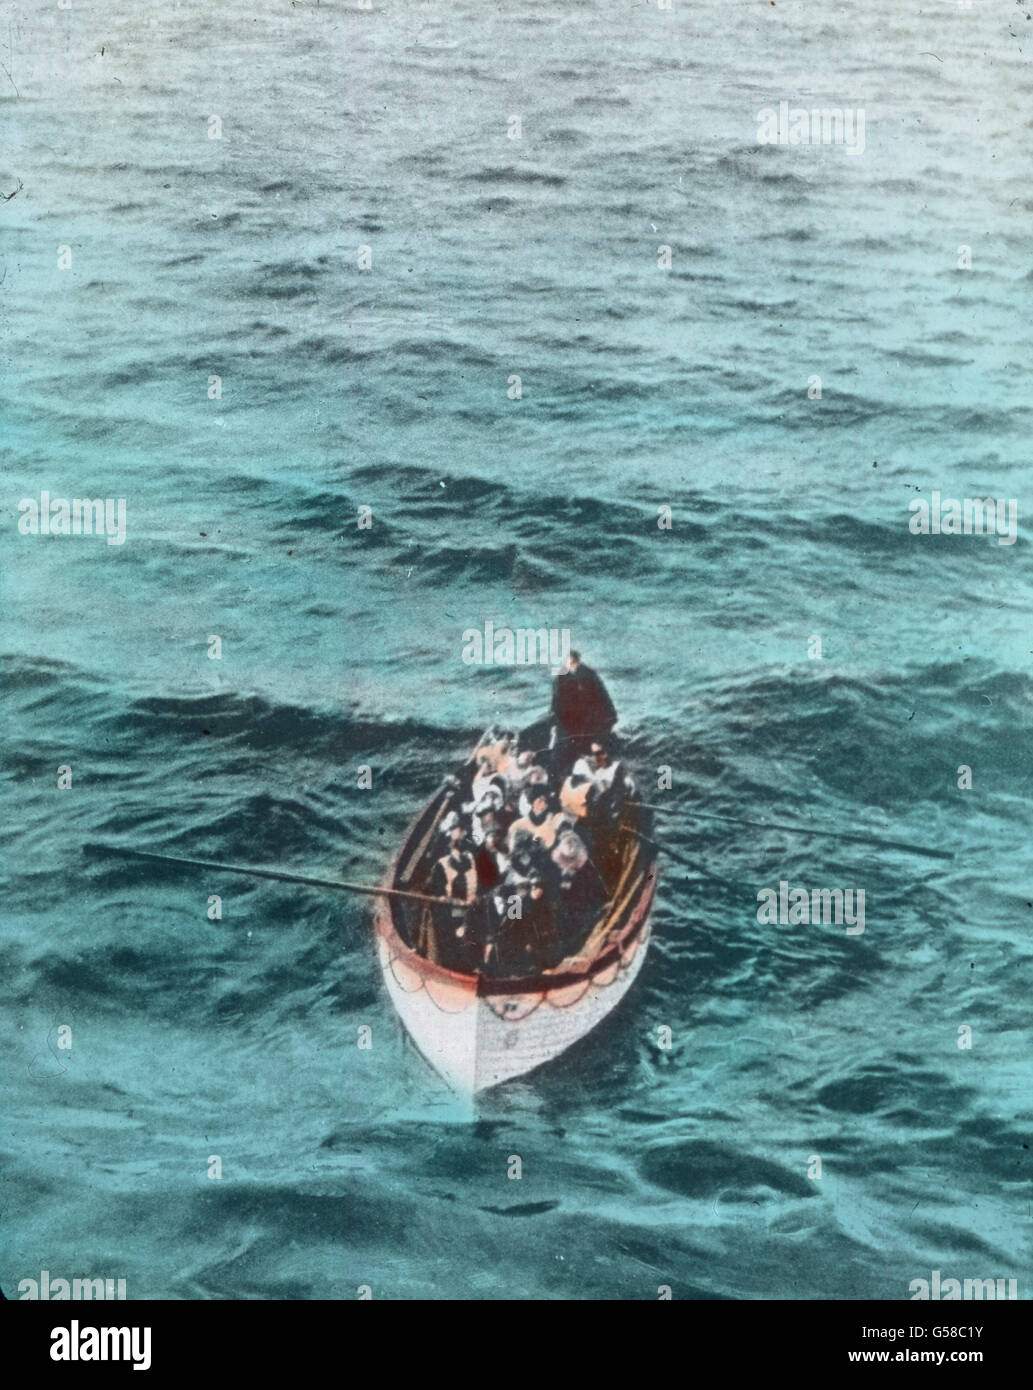 Eines der Rettungsboote der RMS Titanic, vom Deck der RMS Carpathia fotografiert. The maiden voyage of the Titanic 1912, Titanic disaster - The sinking of the Titanic - lifeboat with shipwrecked people - photo taken from Carpathia Liner, hand coloured glass slide - Carl Simon, history, historical Stock Photo